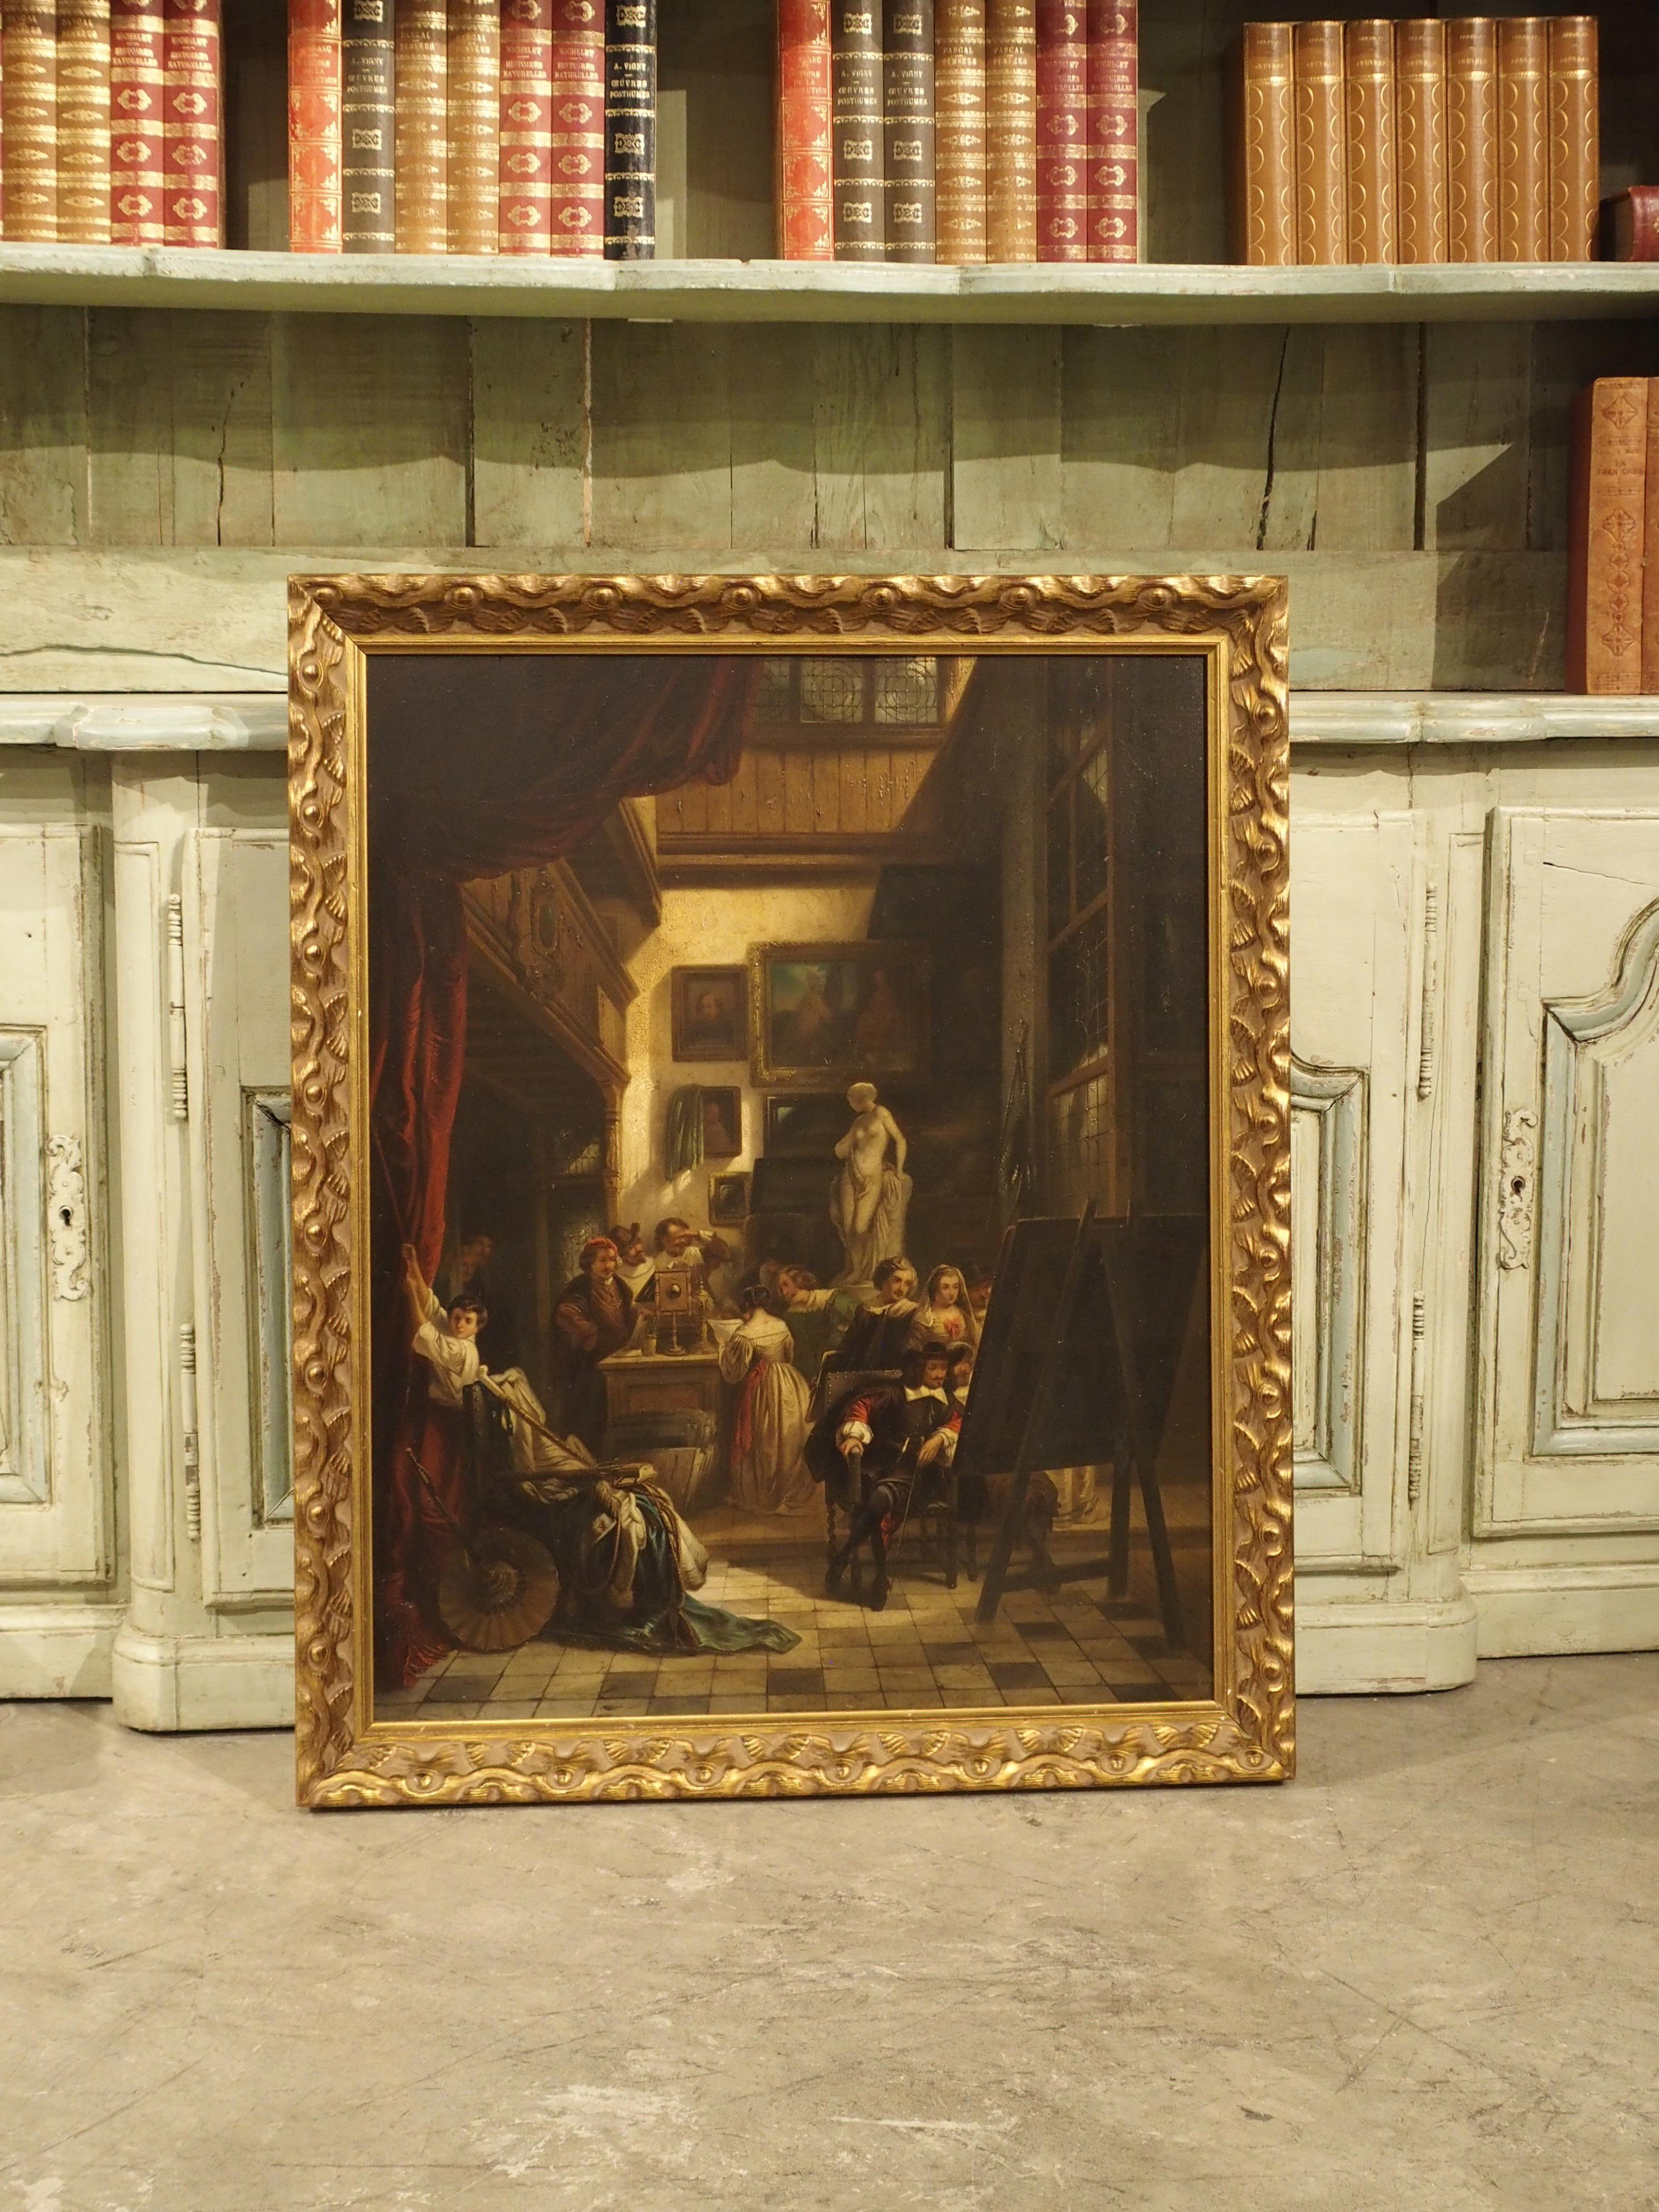 This fantastic oil on board painting is entitled “The Mayor of Amsterdam in Rembrandt’s Studio”. The painting is surrounded by a gilt frame adorned with beading and sinuous medallions.

A rich three-dimensional scene is depicted by utilizing a